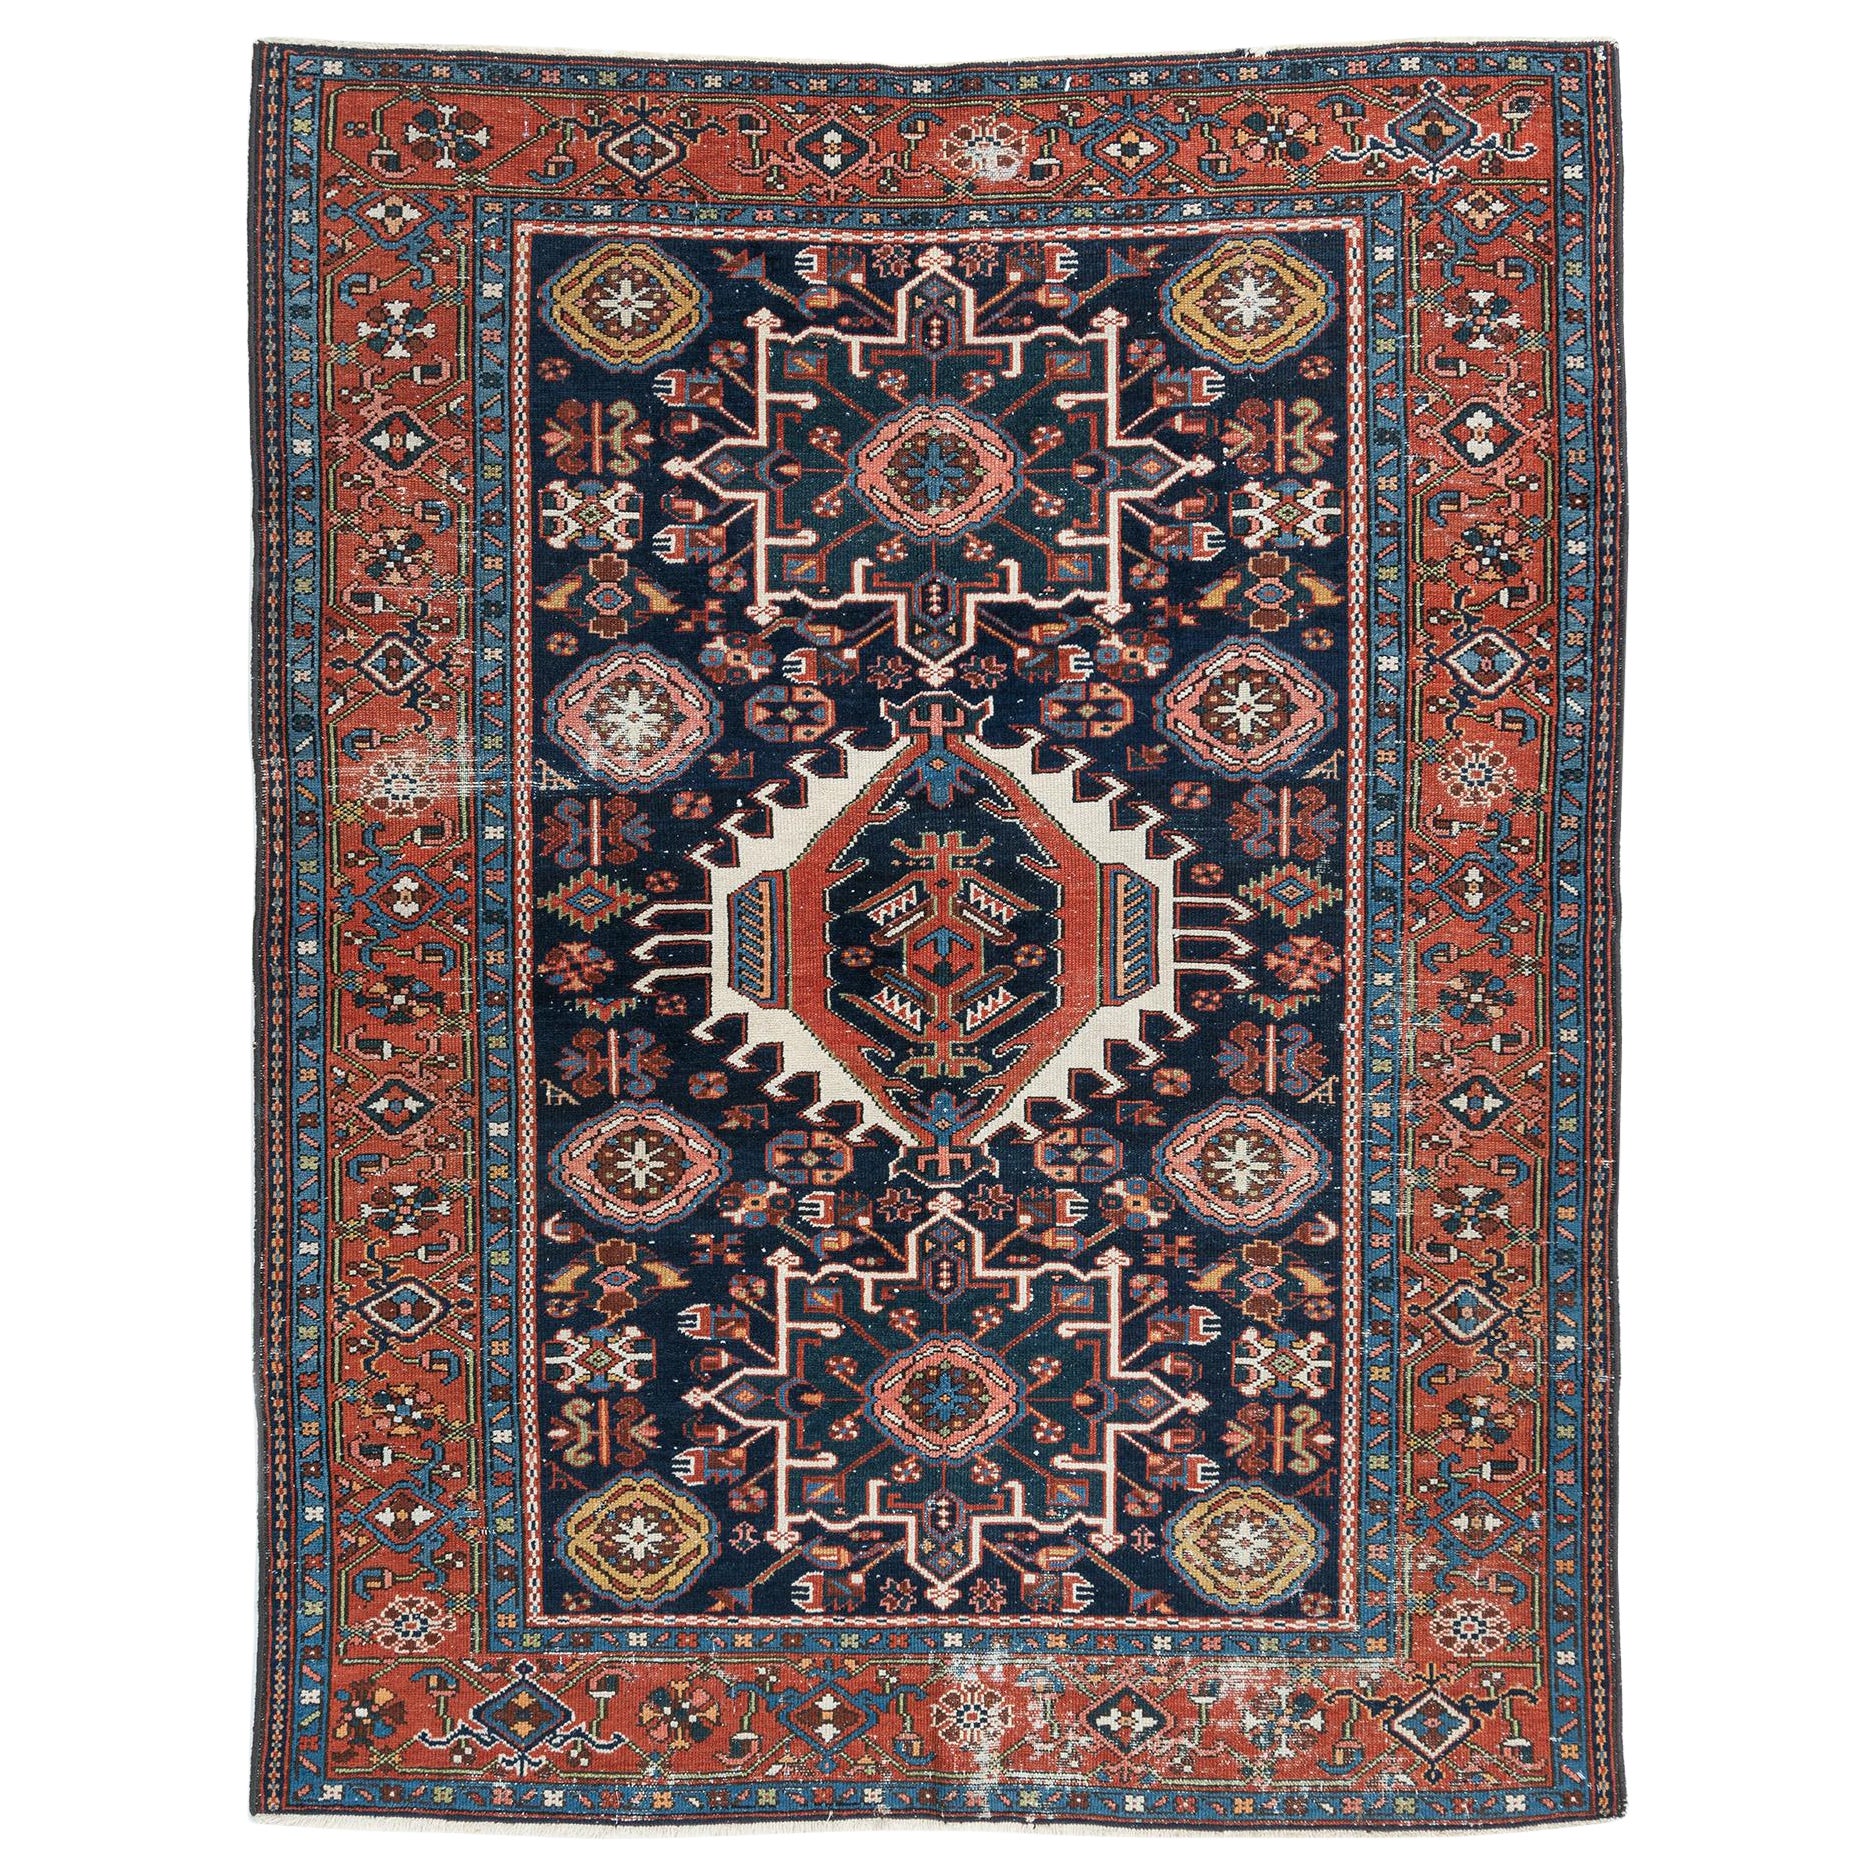 Antique Distressed Brick Red Persian Heriz Area Rug  4'1 x 6'3 For Sale